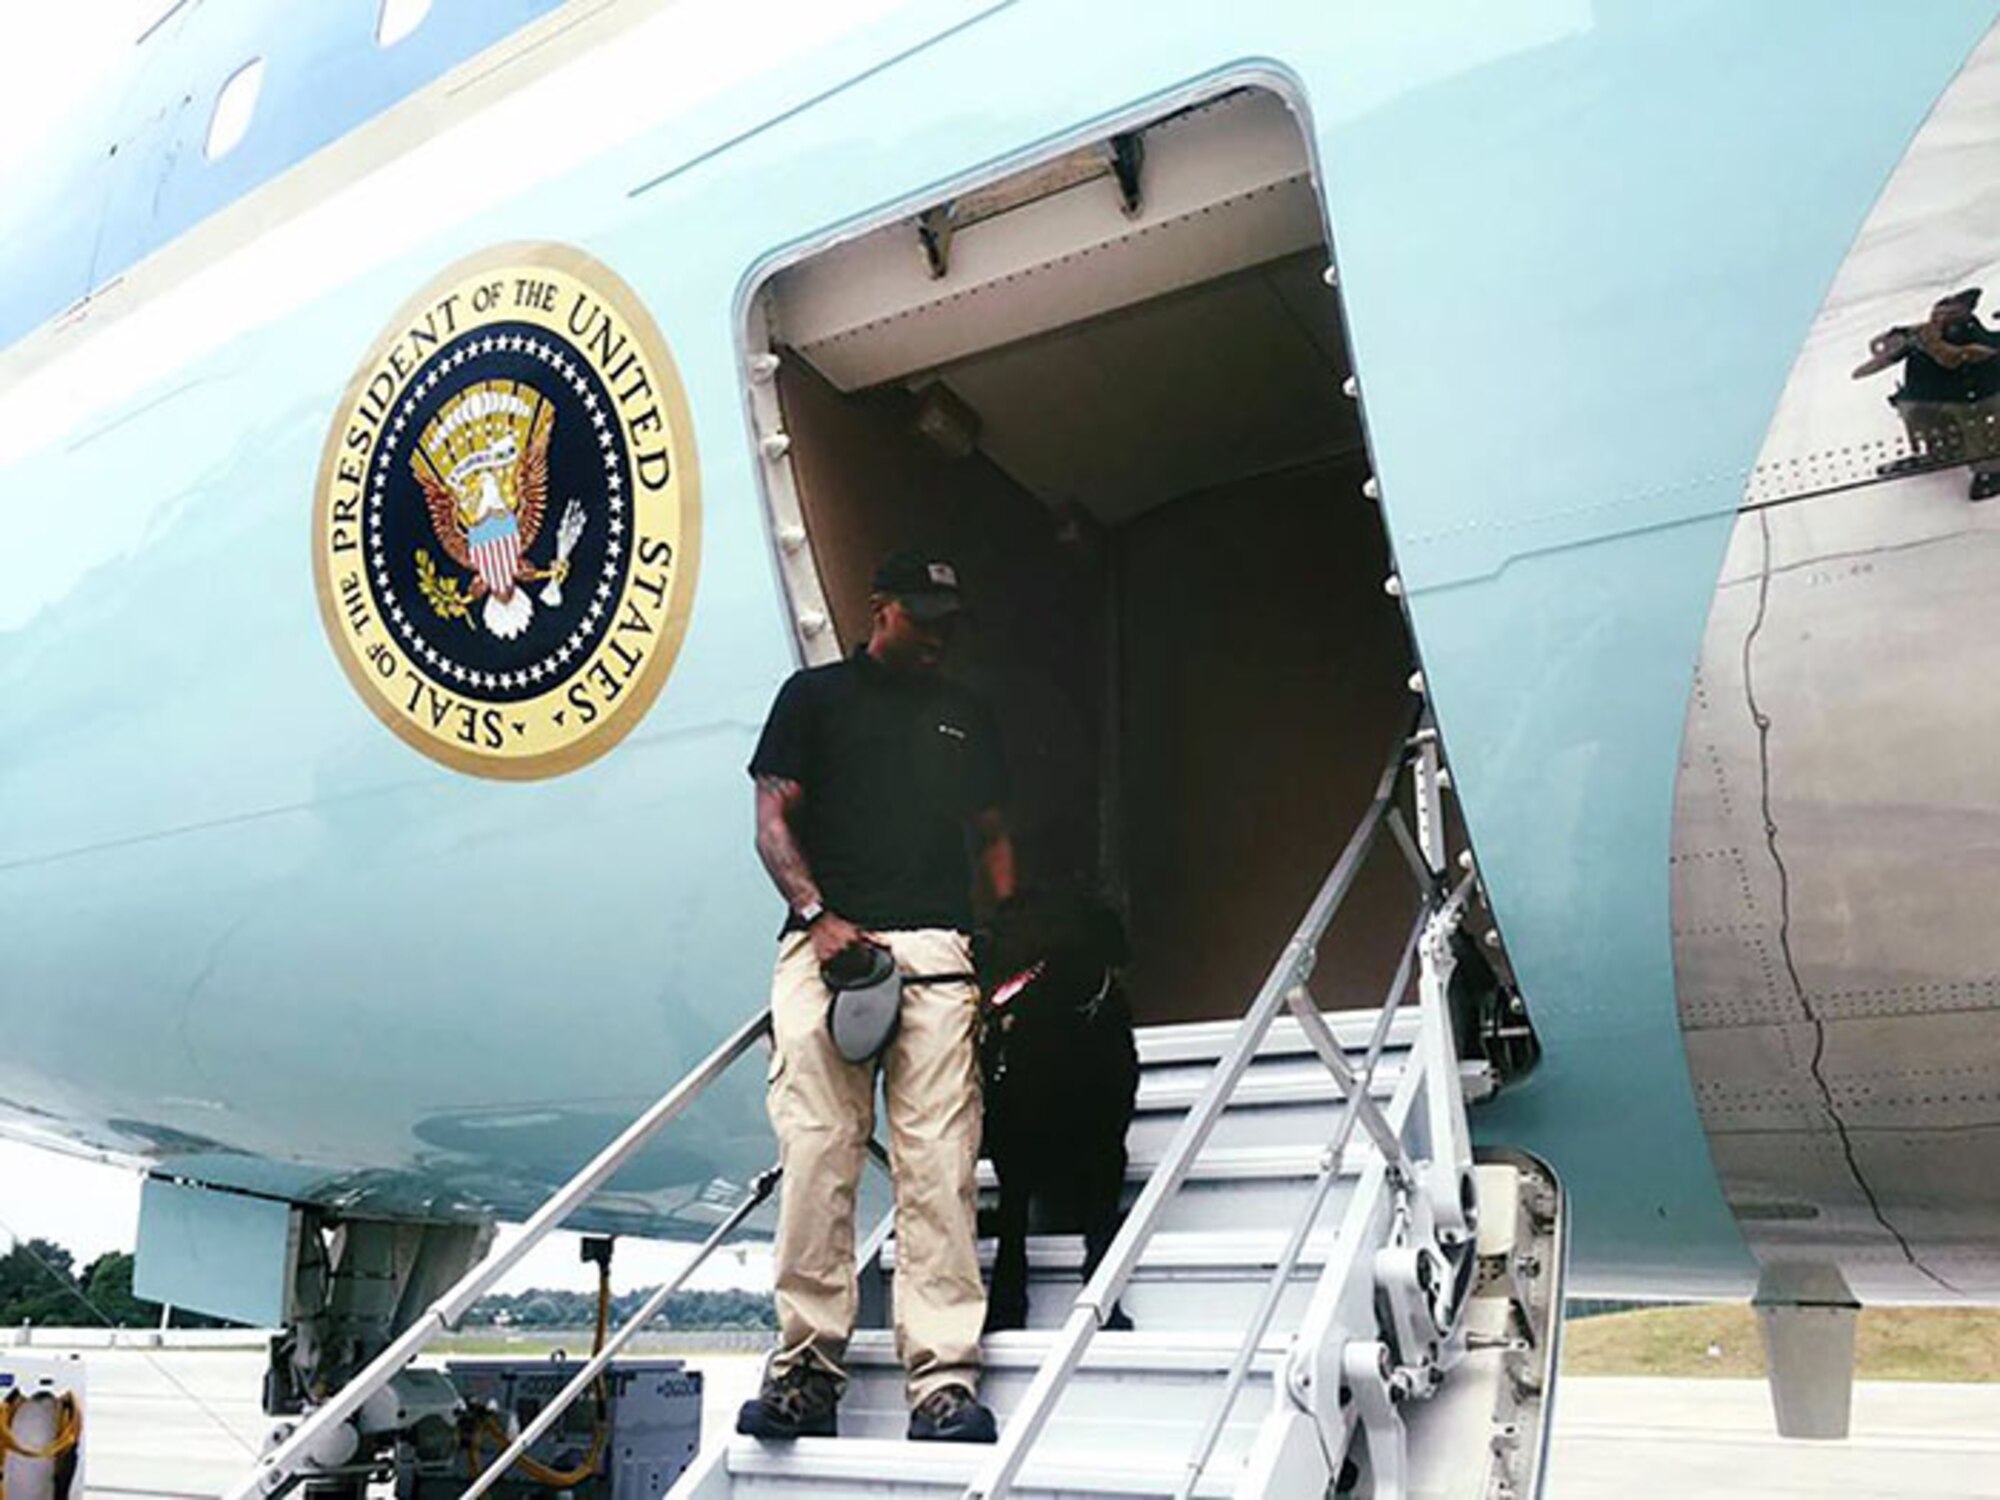 U.S. Air Force Staff Sgt. Dominick Young, 100th Security Forces Squadron Military Working Dog handler, and partner MWD Brock pose for a photo on the steps of Air Force One during a recent detail in support of the president of the United States visit to the G20 Summit in Hamburg, Germany, in July 2017. The MWD team represented RAF Mildenhall in support of the mission and worked alongside Secret Service dog teams. Brock is a Giant Schnauzer and the only one in the Department of Defense. (Courtesy photo)